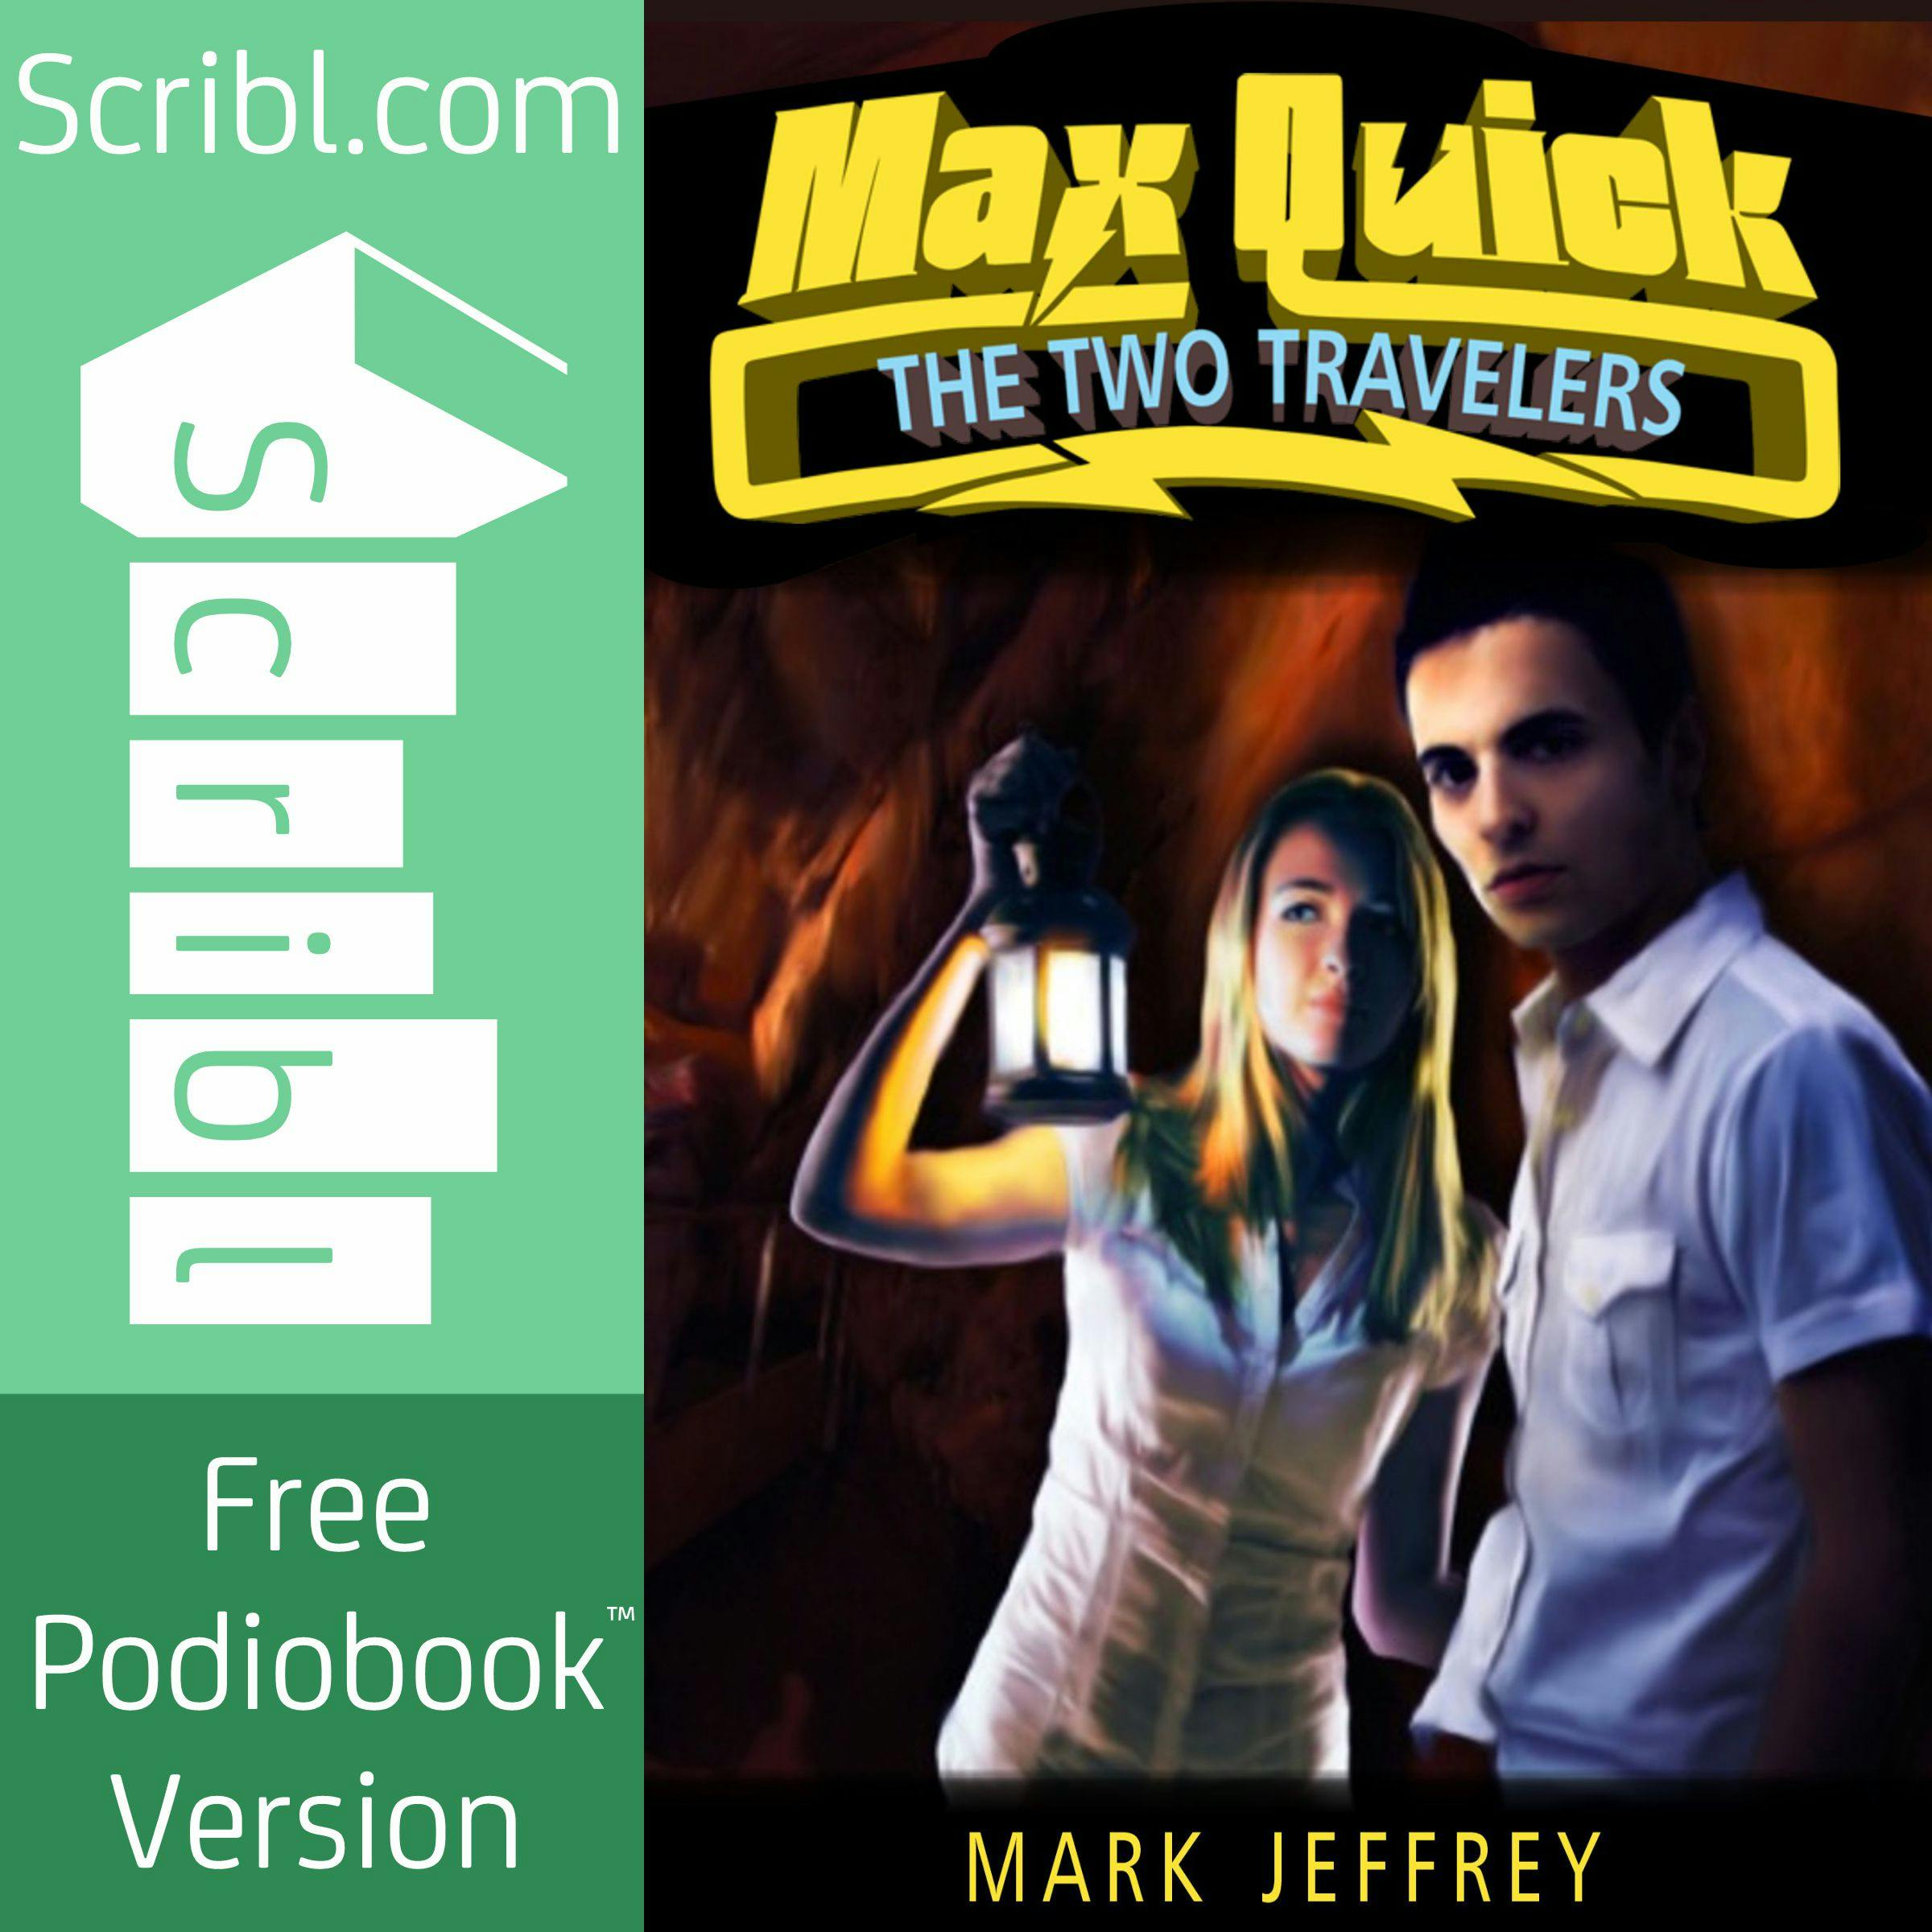 Max Quick 2: The Two Travelers:Mark Jeffrey | Scribl